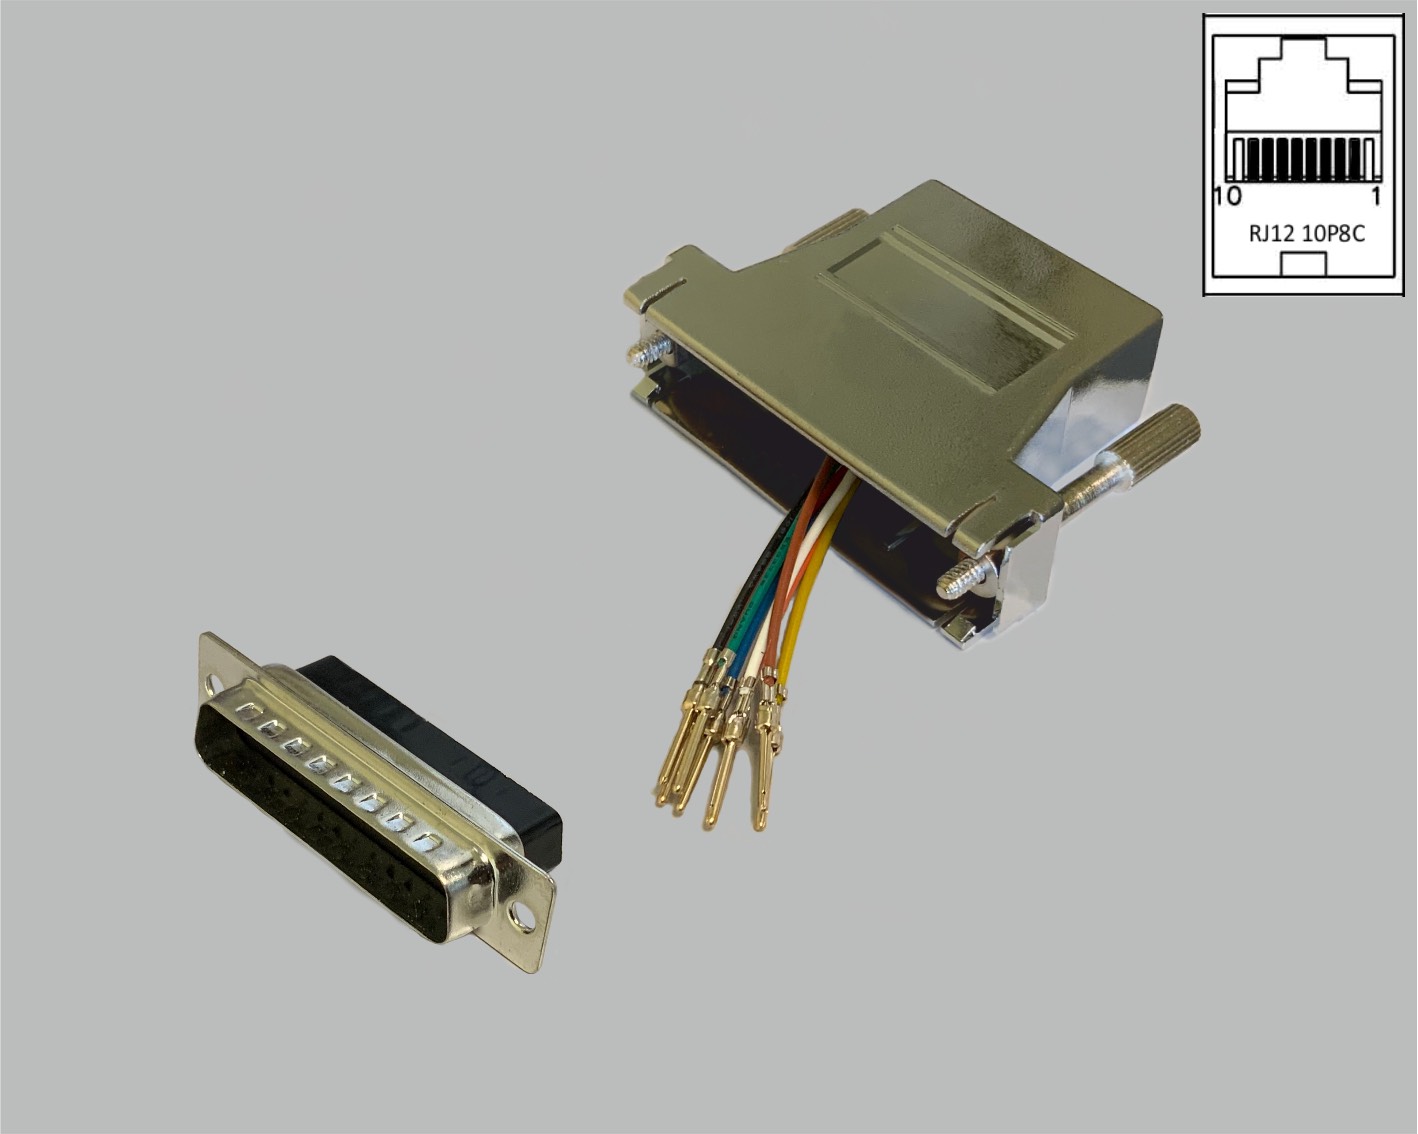 D-Sub/RJ adapter, freely configurable, D-Sub male connector 25-pin to RJ45 (10P8C) female connector, metallised